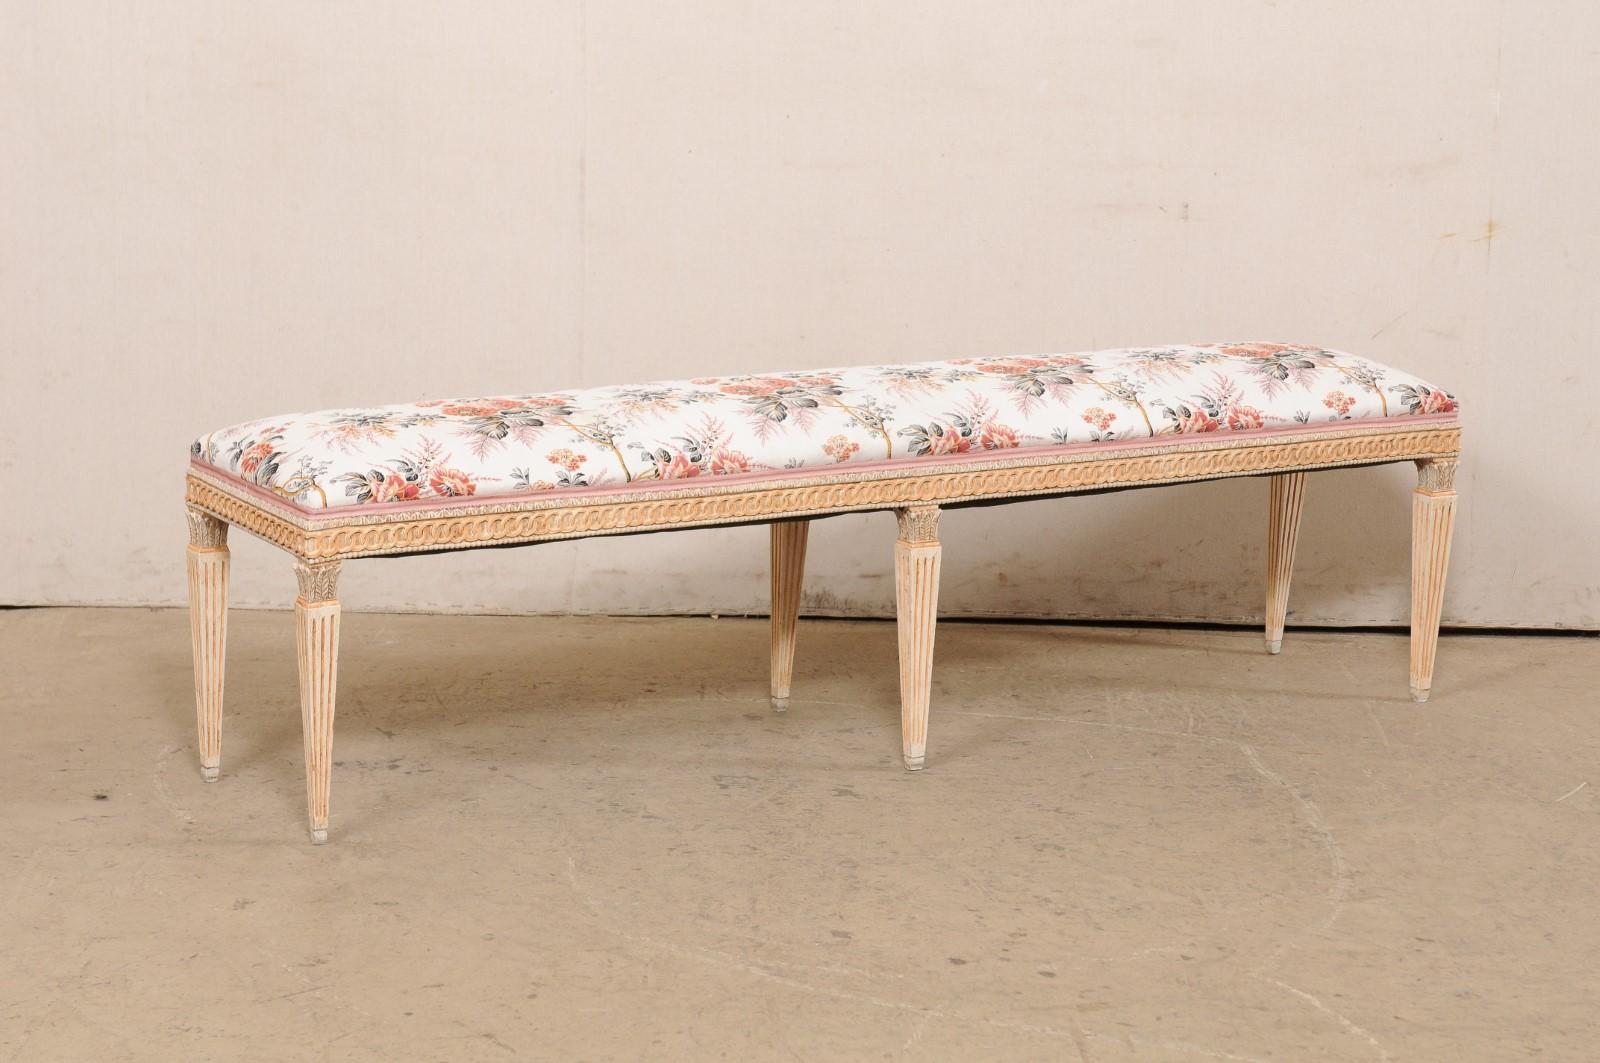 A French Louis XVI style carved-wood bench with its original finish and floral upholstered seat. This vintage bench from France has been nicely carved on all sides, with a circular linked chain and beaded trim about the apron, and presented upon six